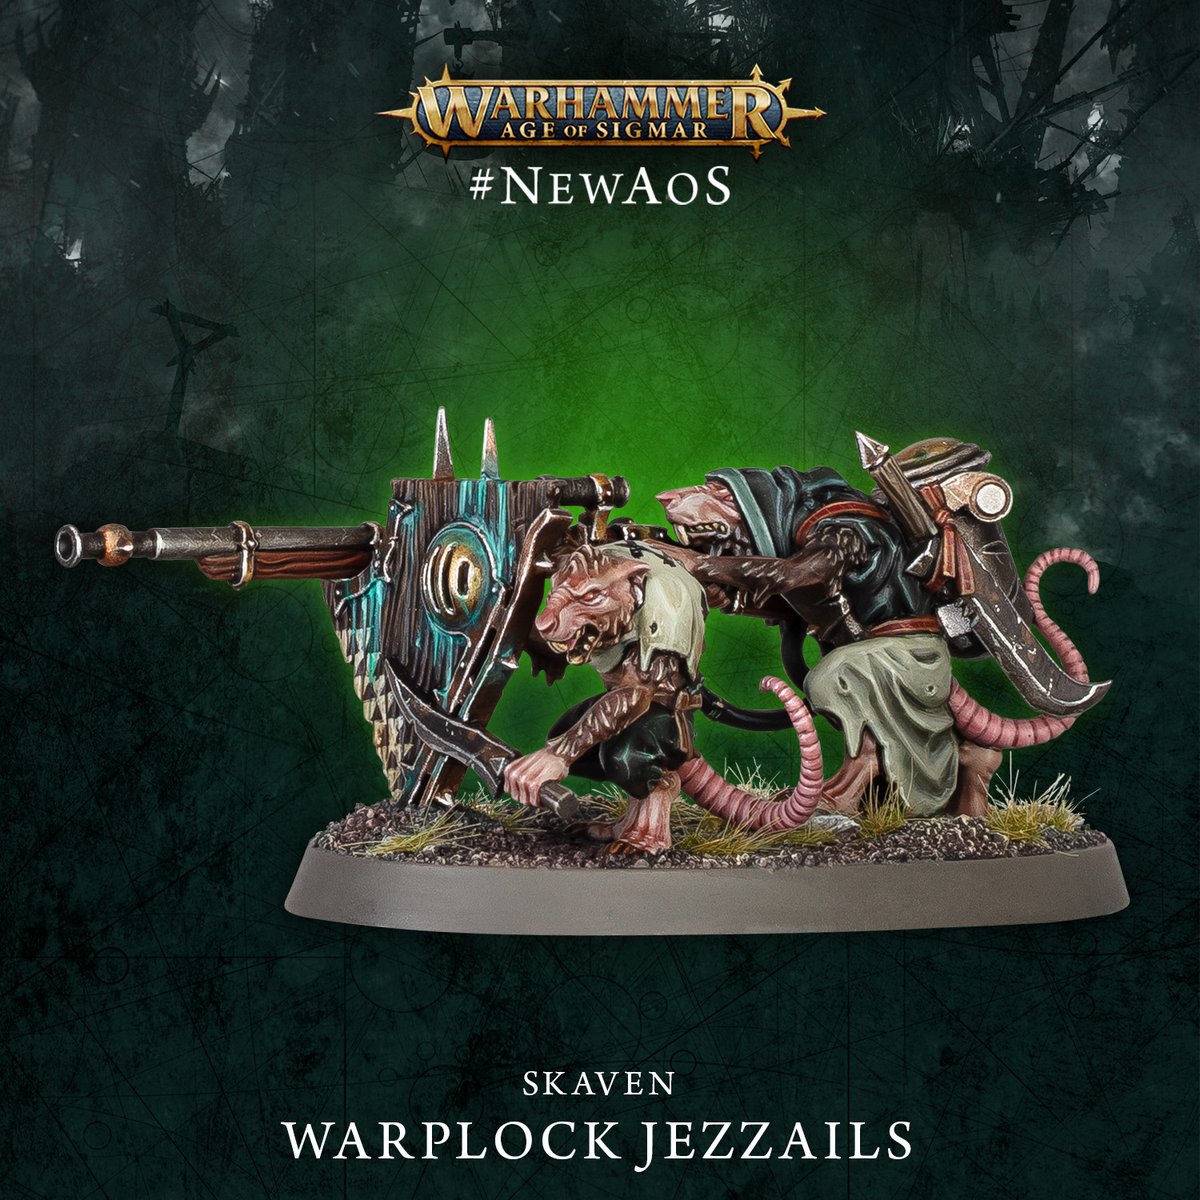 It's a long shot, but we thought you might want to see some more rats! 🐀 Meet the jezzail crew: ow.ly/bL1X50Rx2tZ #WarhammerCommunity #NewAoS